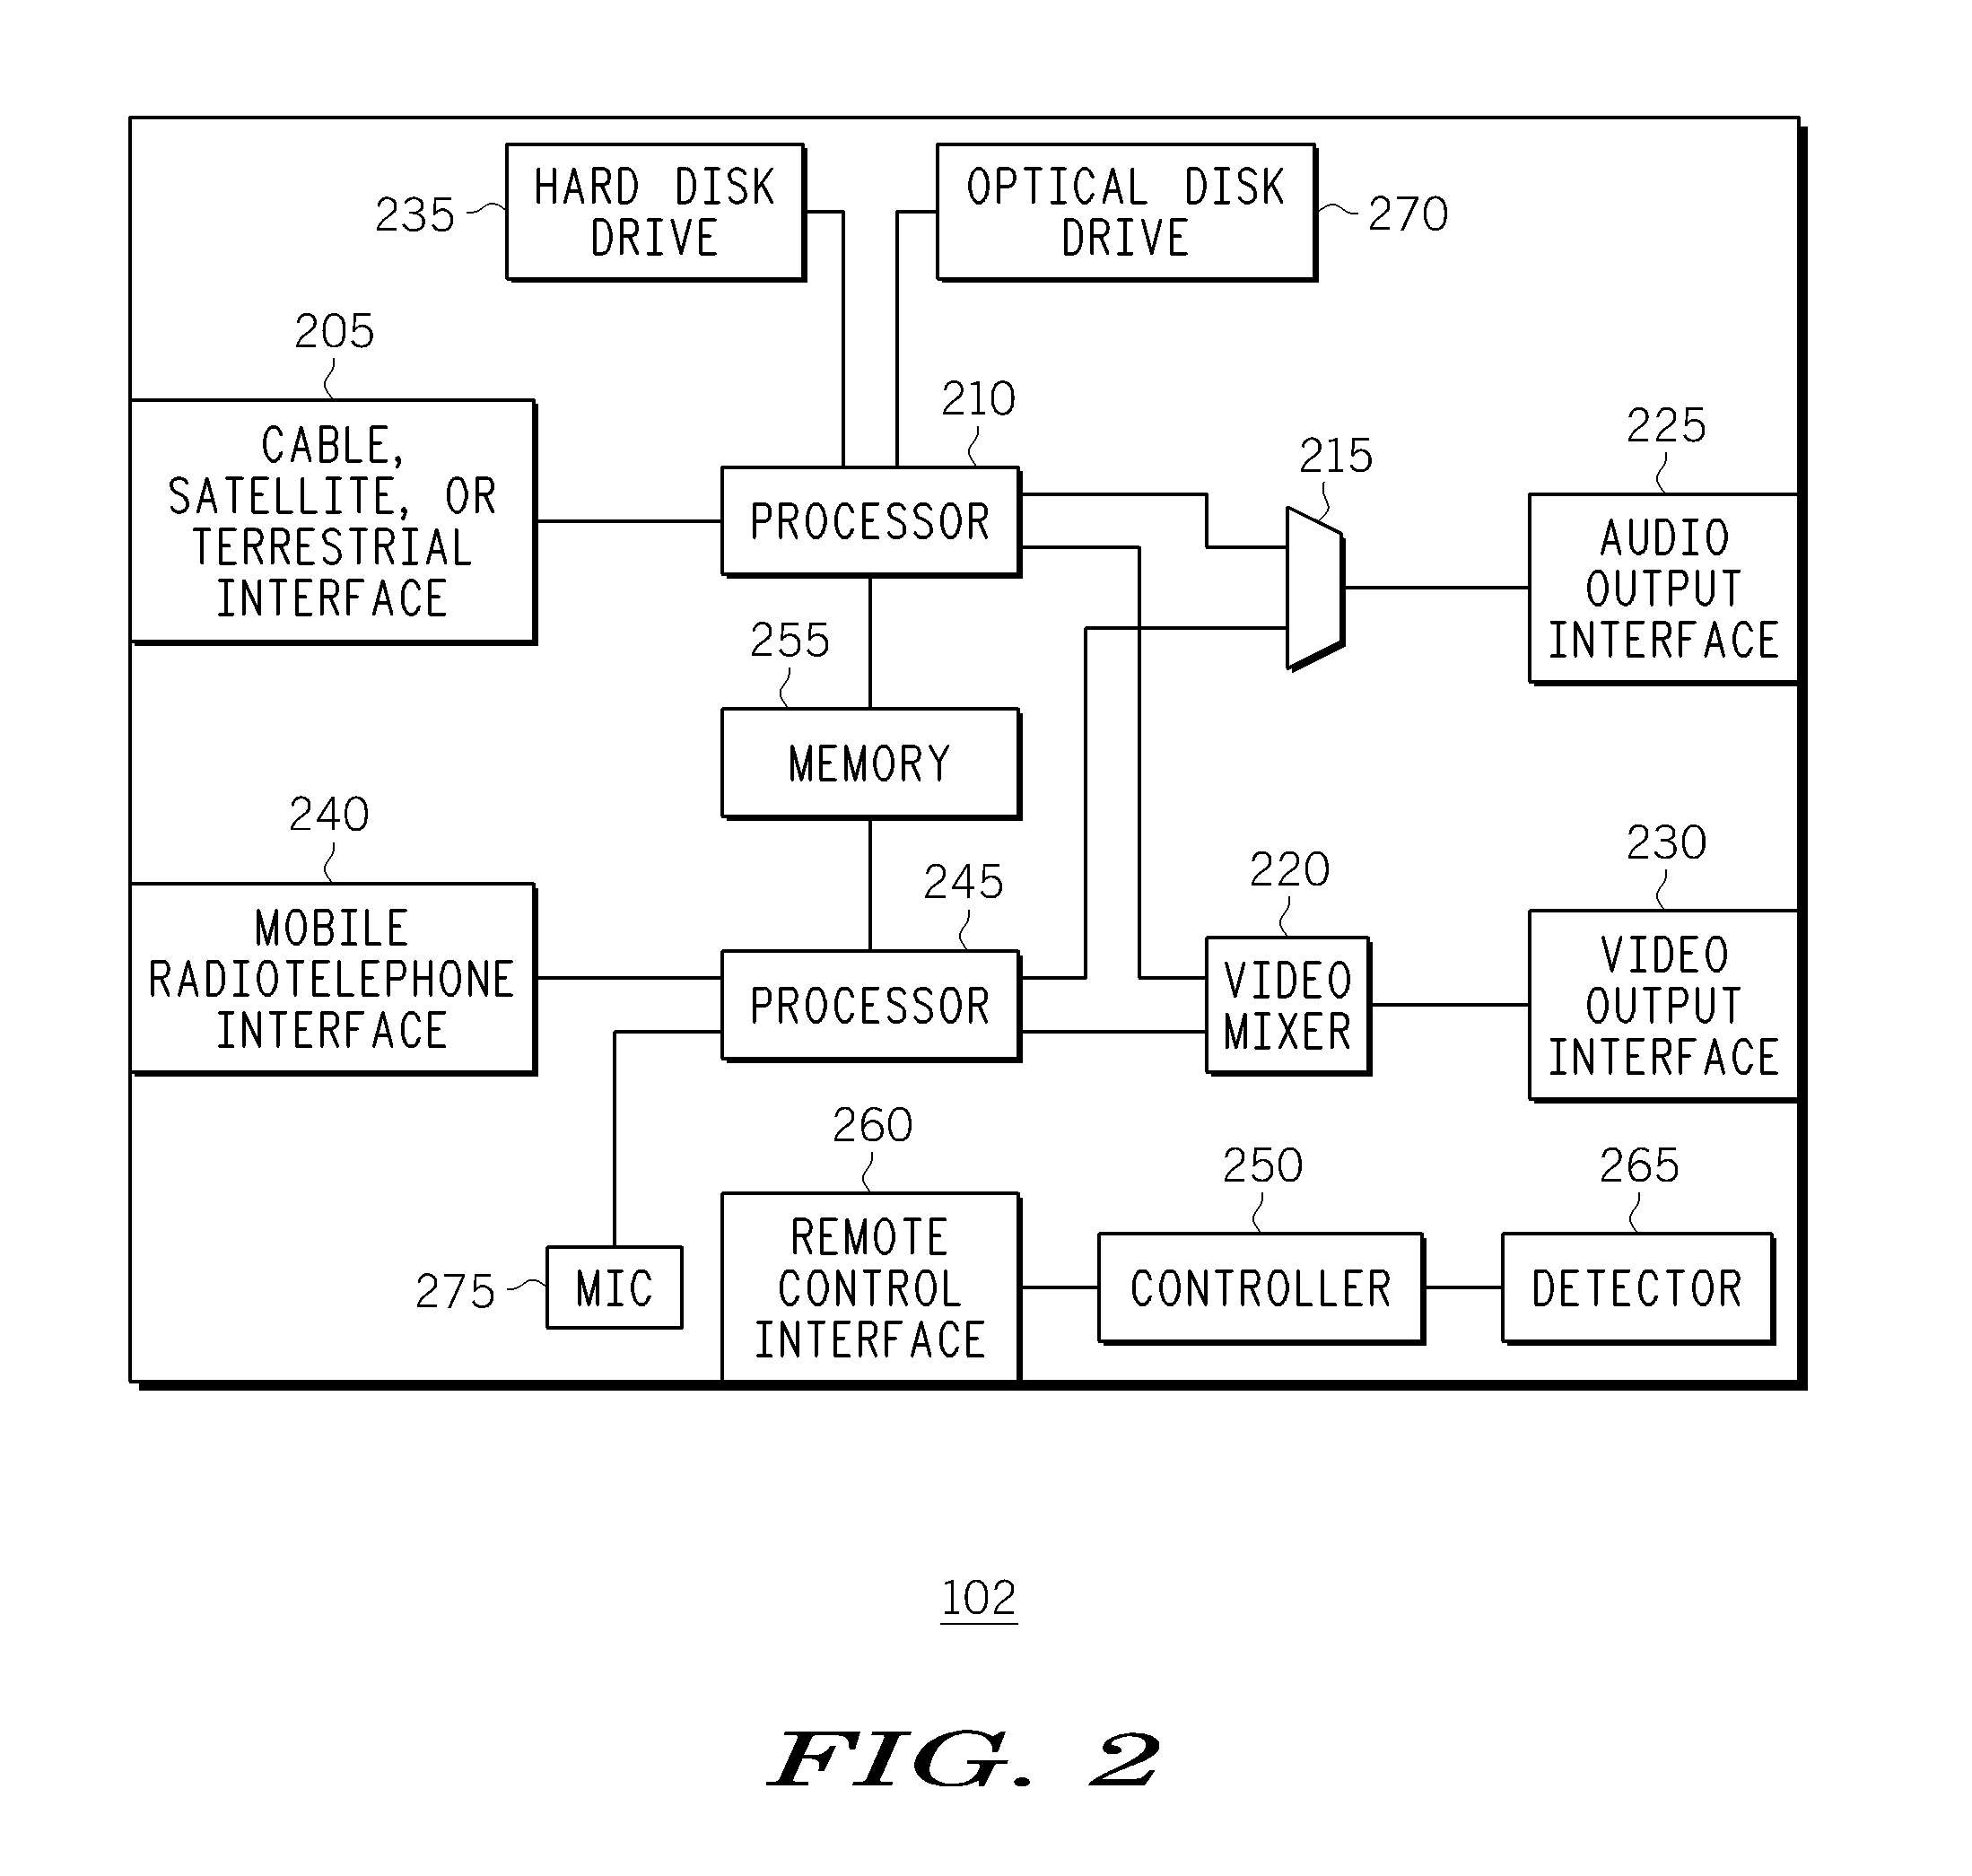 Set-Top Box and Method for Operating the Set-Top Box Using a Mobile Telephone